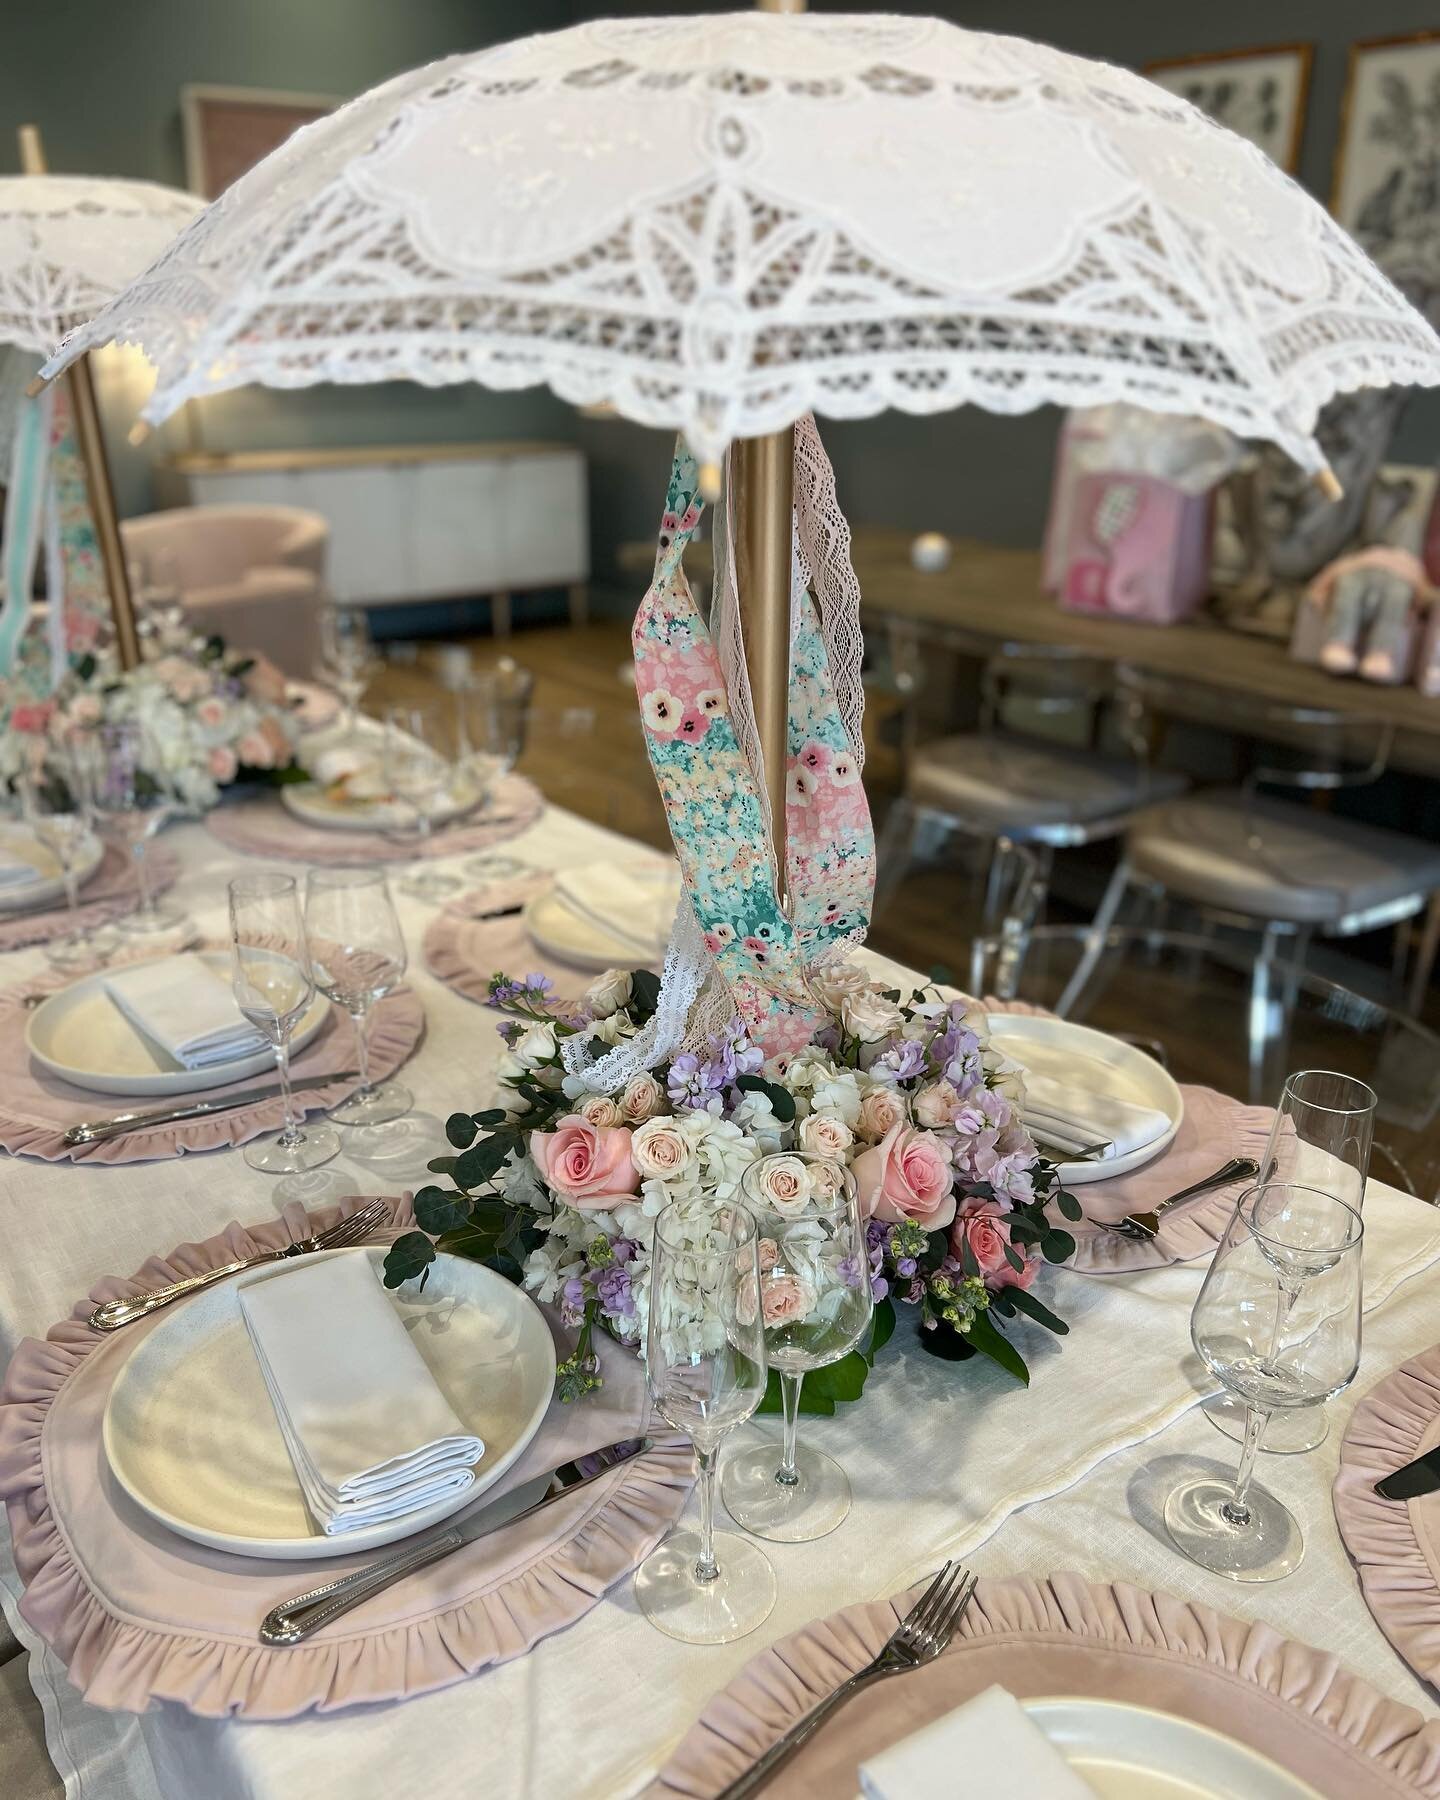 A very special day to celebrate my newest granddaughter on the way 💞 We had so much fun planning this shower, which was practically perfect in every way ☂️
.
.
.
Flowers: @galleryflowers 
Custom cookies: @thesugarjarhouston 
Venue: @beanandbottletx